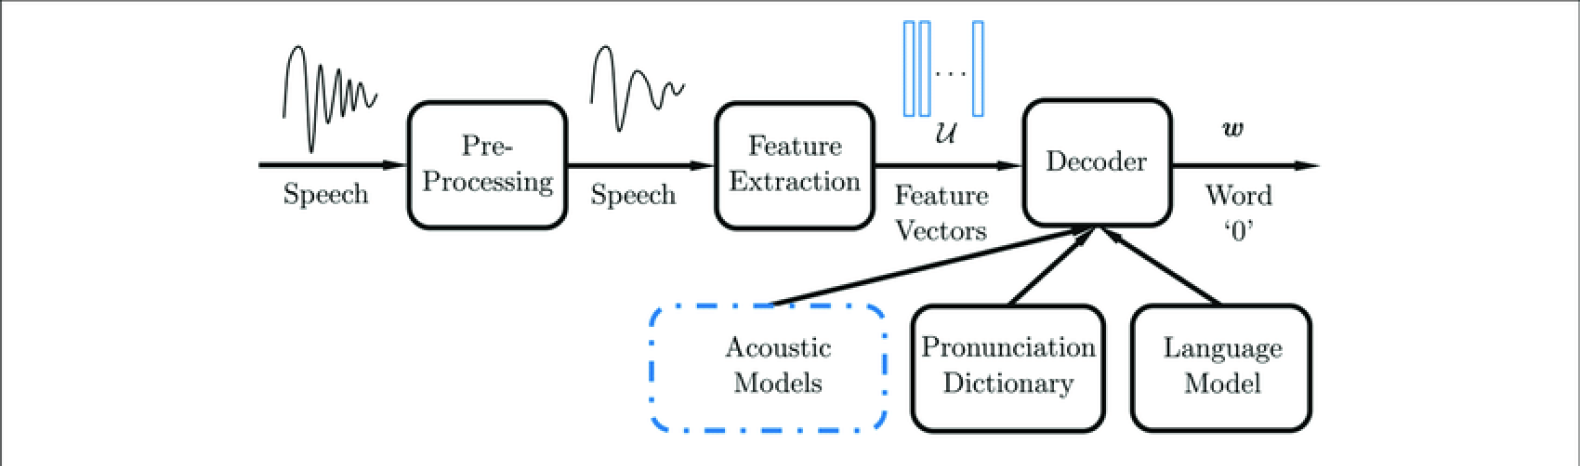 This image provides a clear diagram of an automatic speech recognition system, illustrating the key components and processes involved in the system. Learn about the different stages of the system and how they work together to recognize speech.